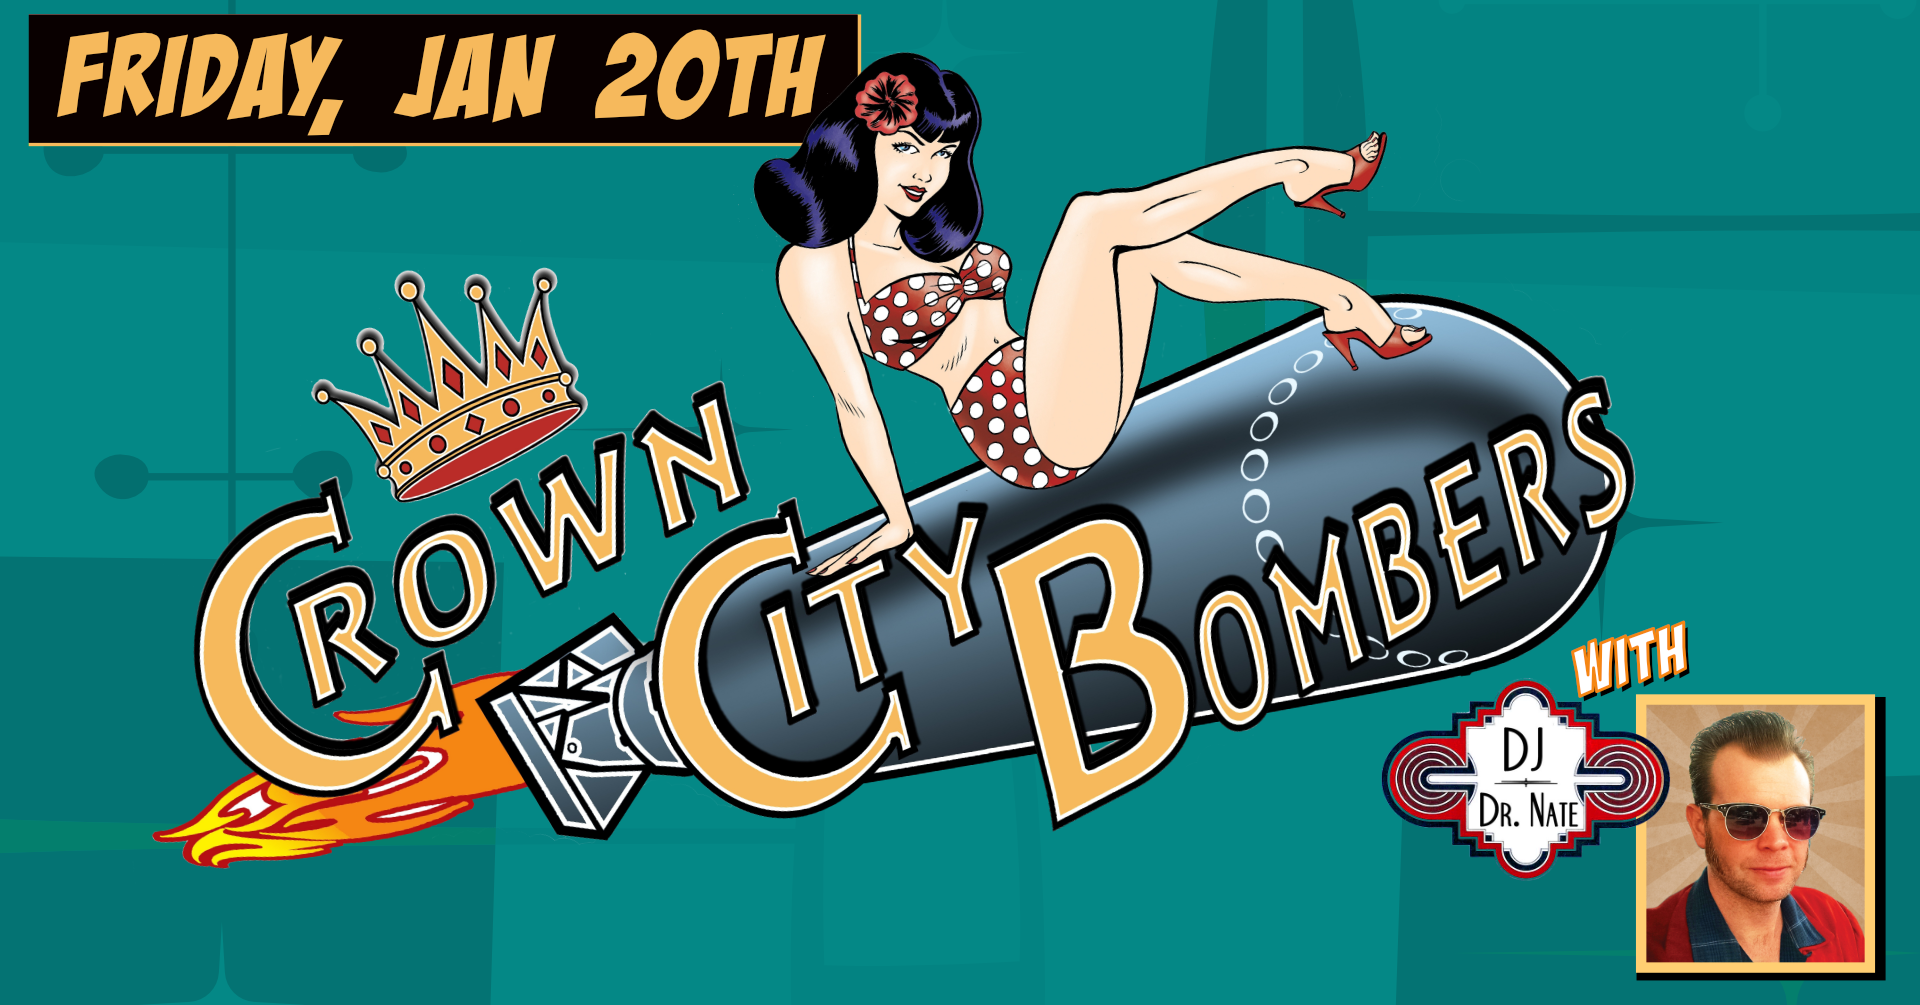 CROWN CITY BOMBERS with DJ DR NATE at The Moose!